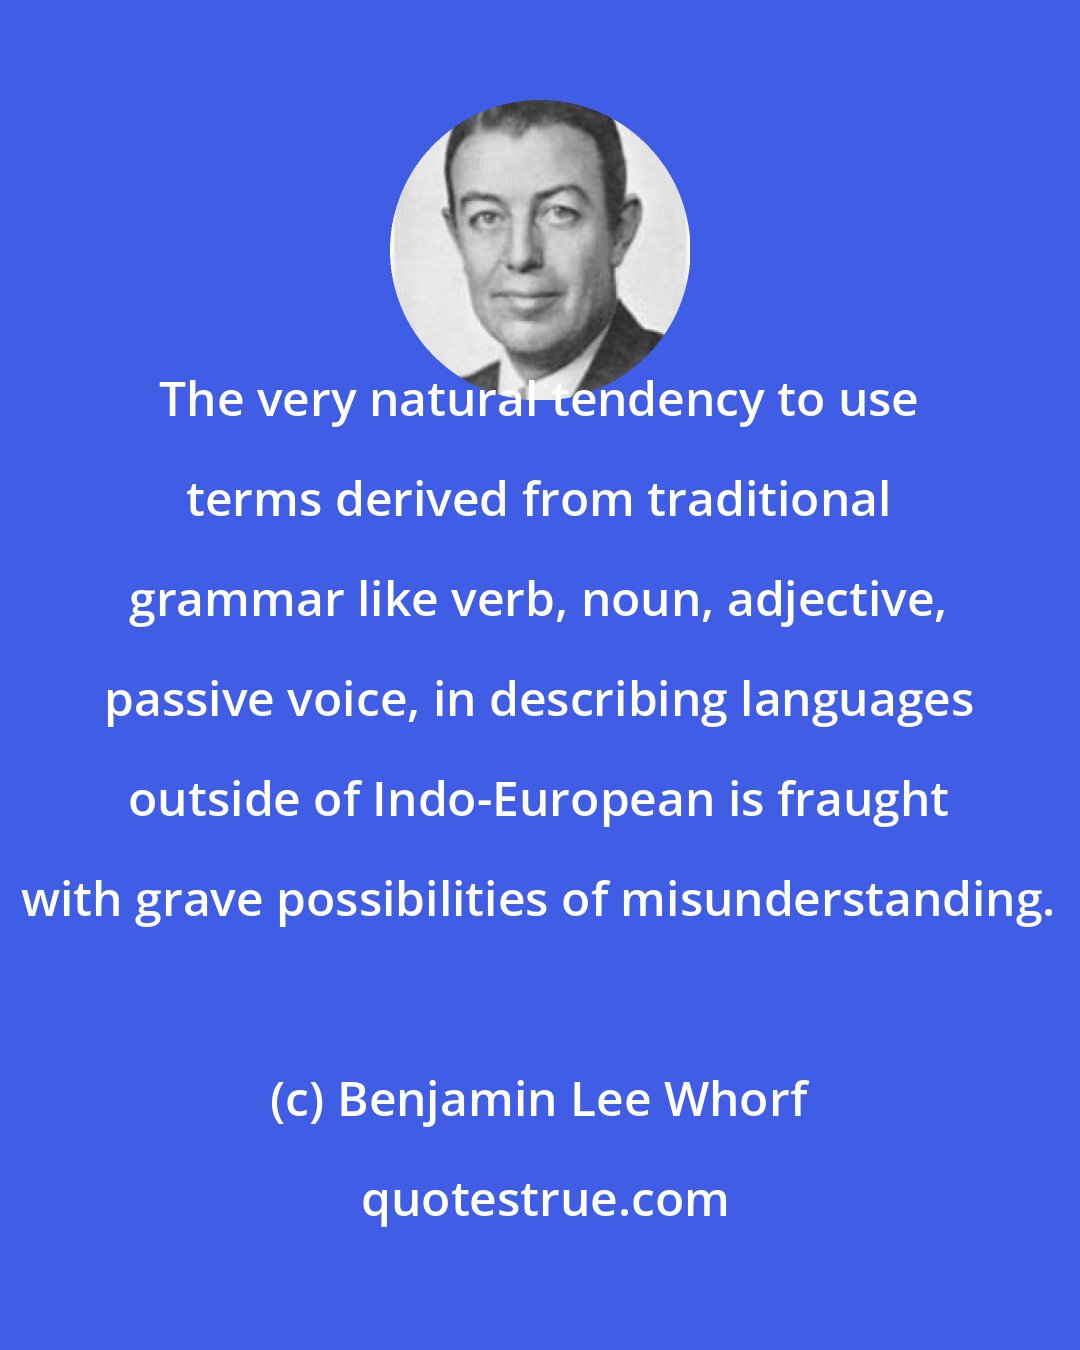 Benjamin Lee Whorf: The very natural tendency to use terms derived from traditional grammar like verb, noun, adjective, passive voice, in describing languages outside of Indo-European is fraught with grave possibilities of misunderstanding.